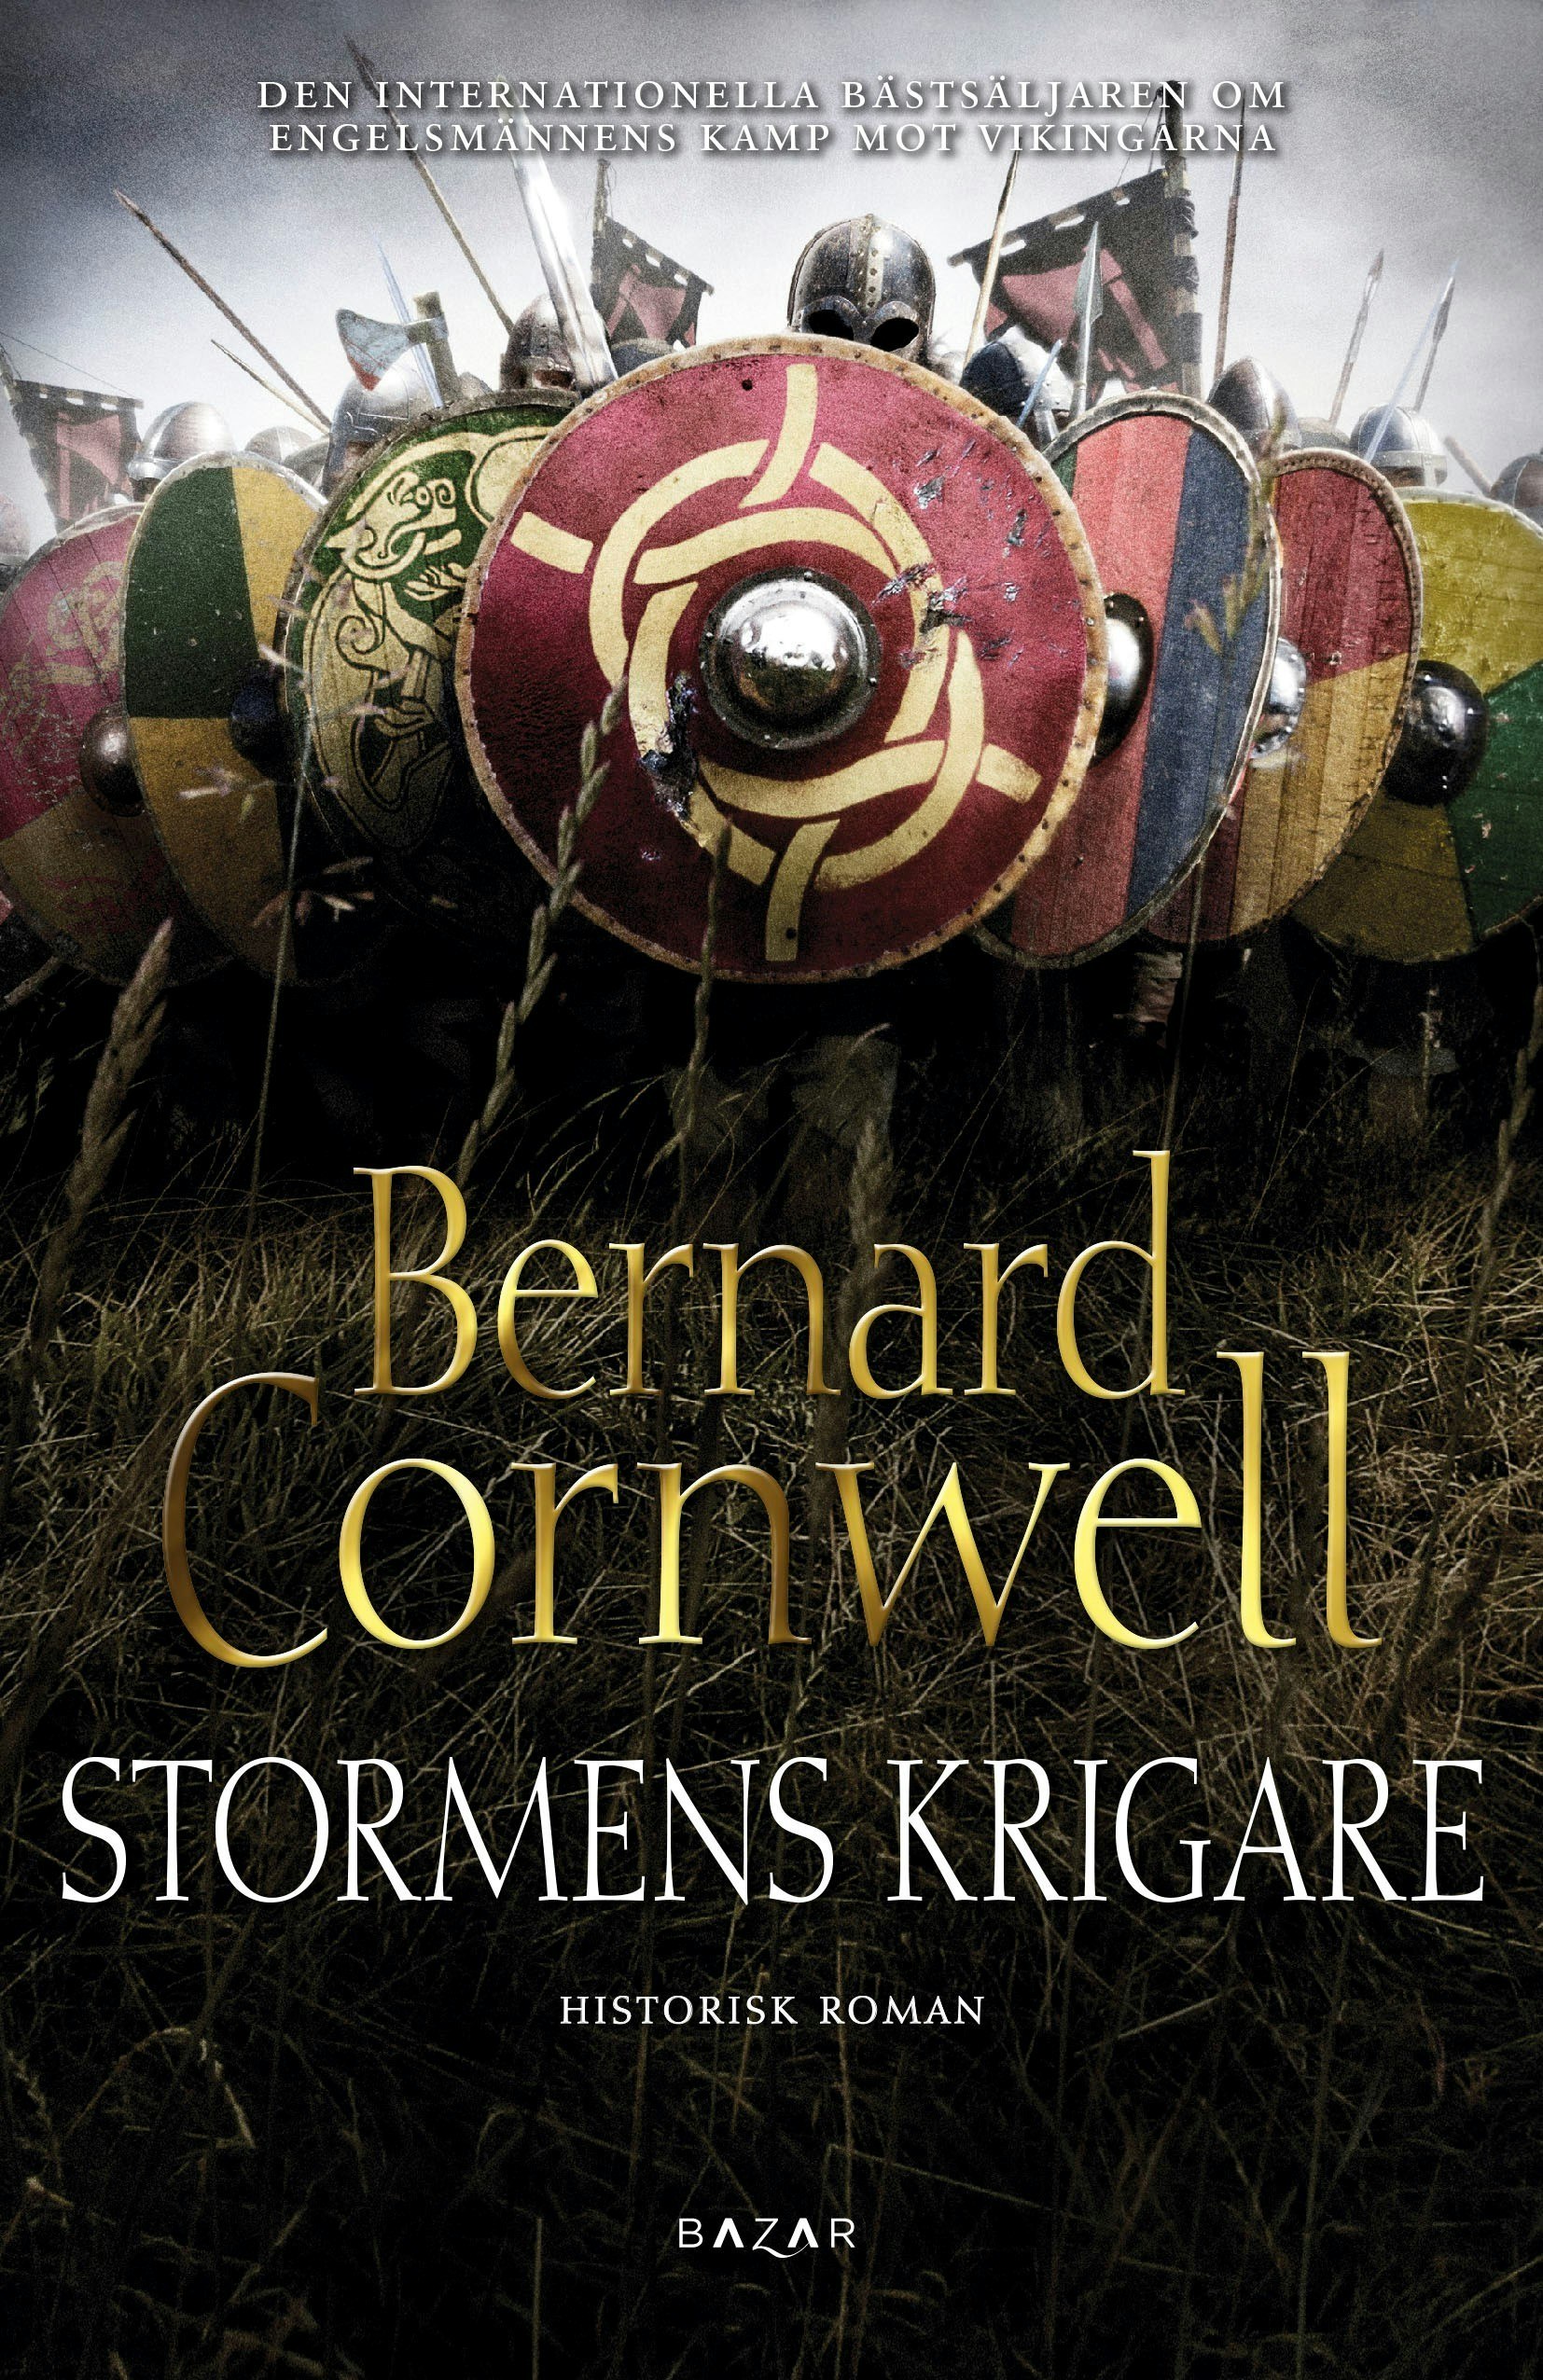 Stormens krigare